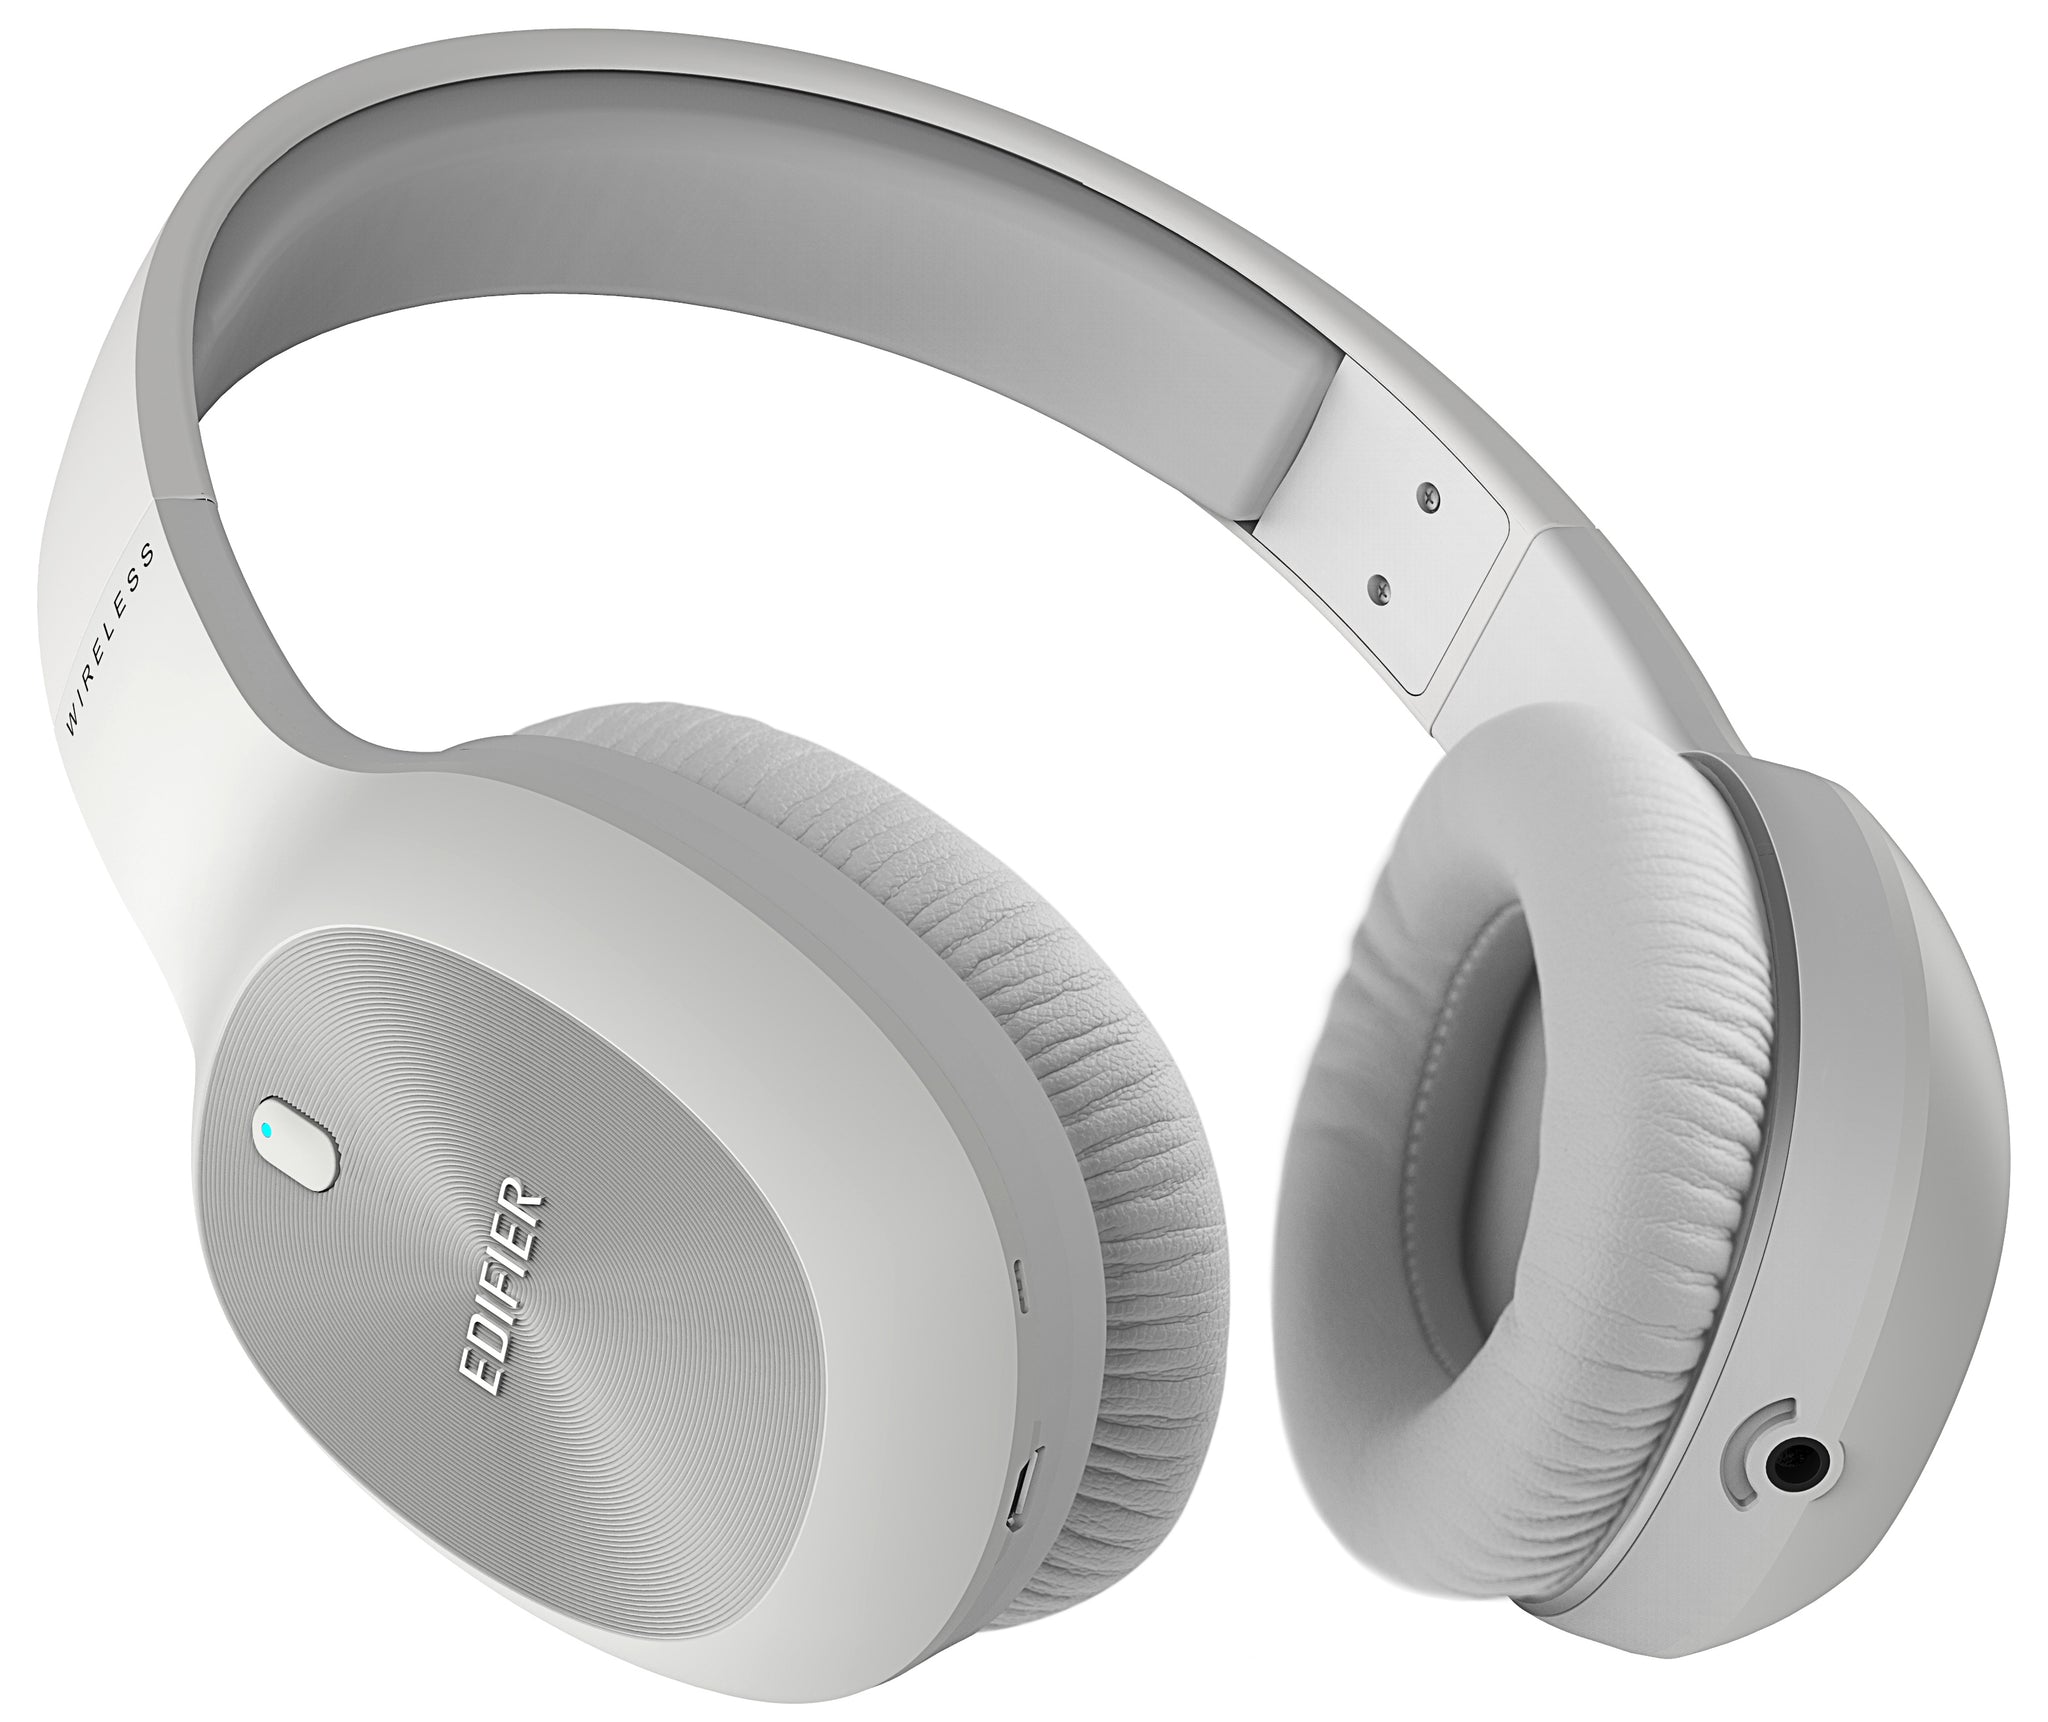 Edifier W800BT Plus Wired And Wireless Bluetooth Headphones - White